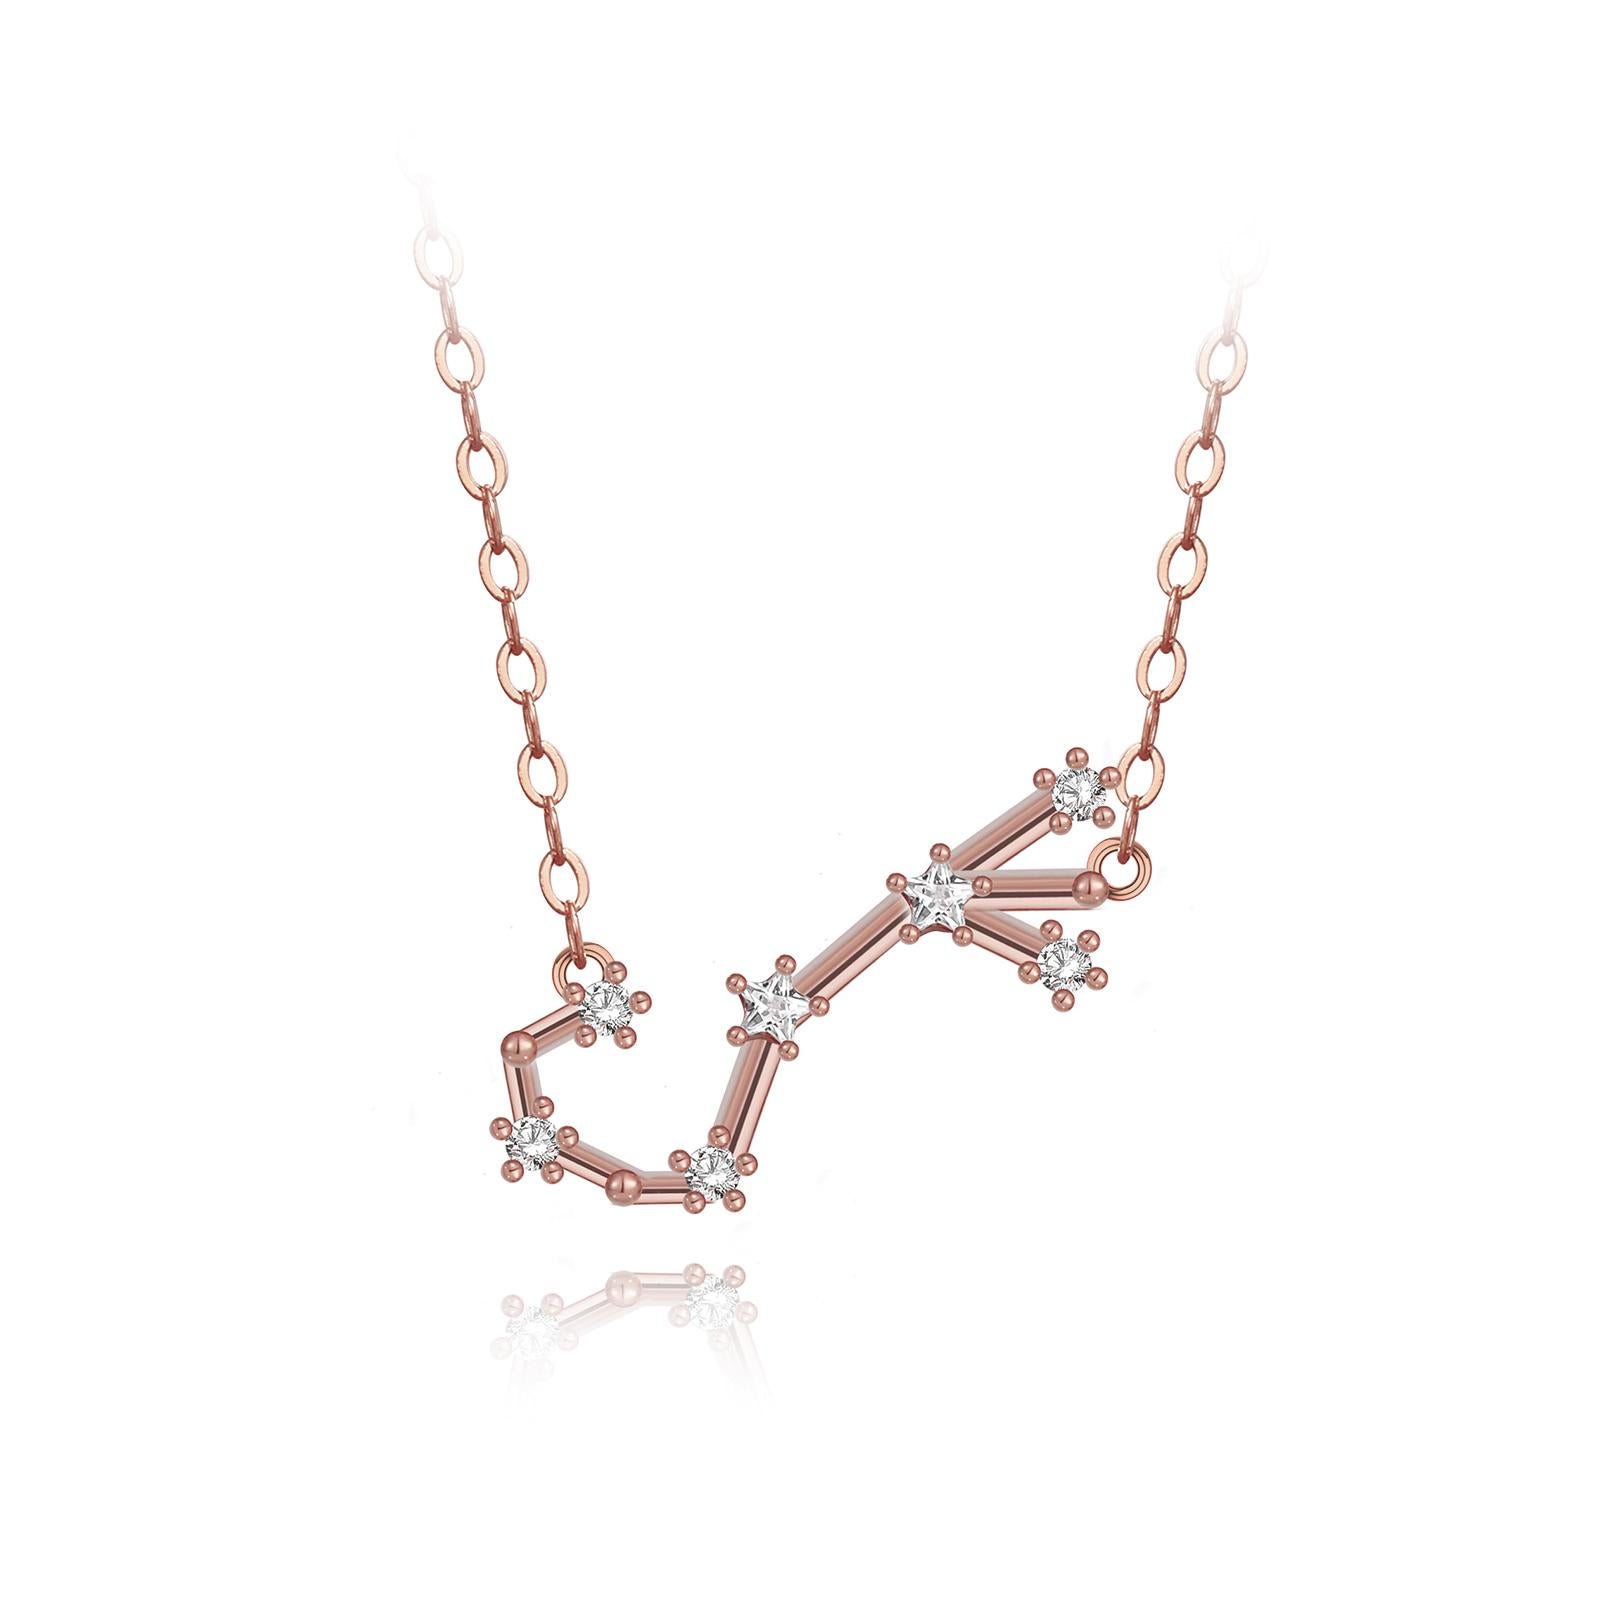 You are unique and your zodiac tells part of your story.  How your zodiac is displayed in the beautiful nighttime sky is what we want you to carry with you always. This scorpio star constellation necklace shares a part of your personality with us